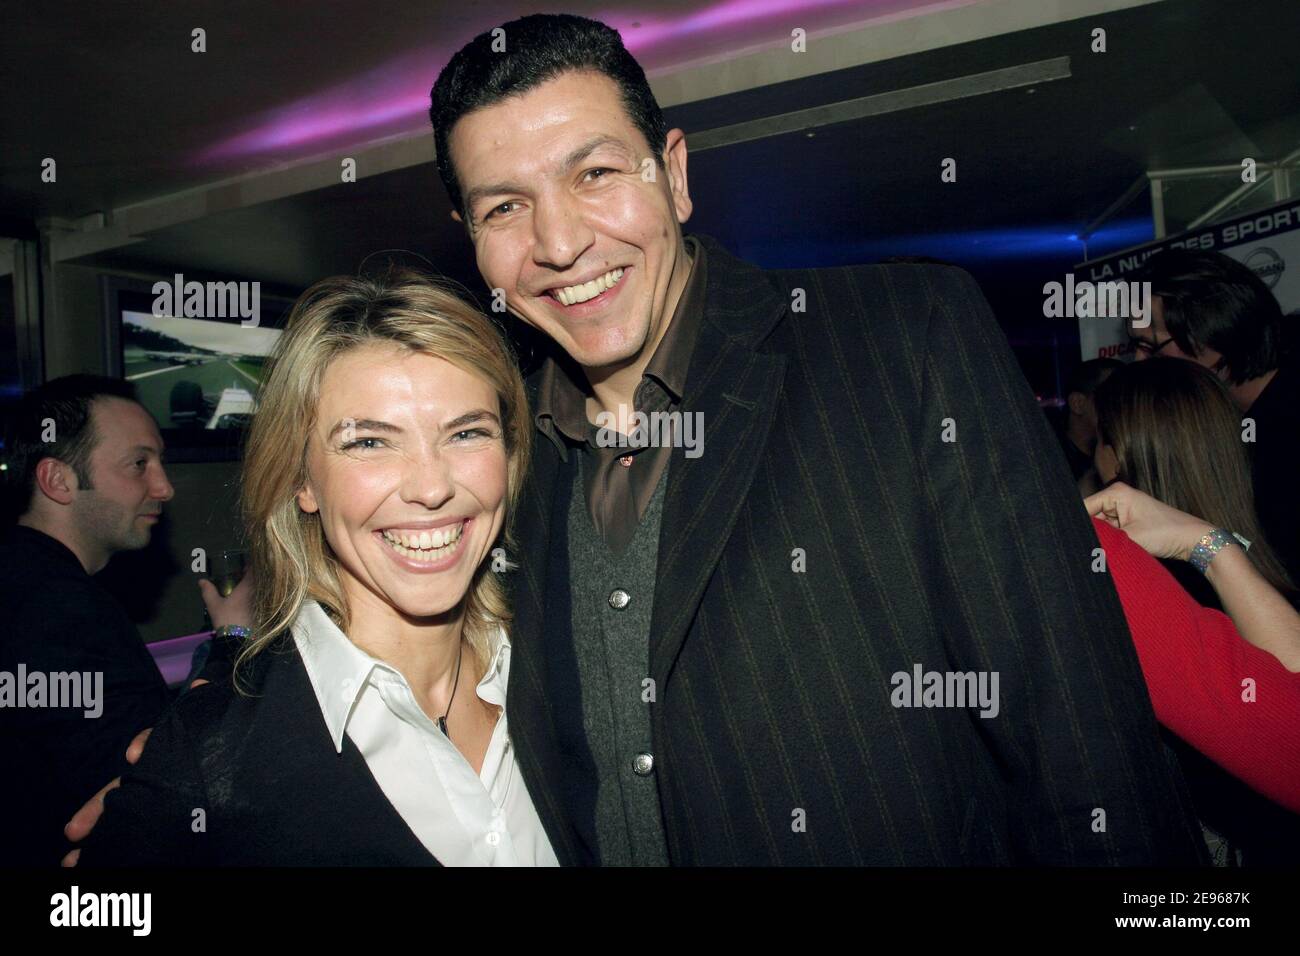 TF1 TV Presenter Nathalie Vincent with former rugbyman Abdelatif Benazzi attend the TF1 party 'La nuit des sports' at the Club l'Etoile in Paris, France, on March 21, 2006. Photo by Benoit Pinguet/ABACAPRESS.COM. Stock Photo